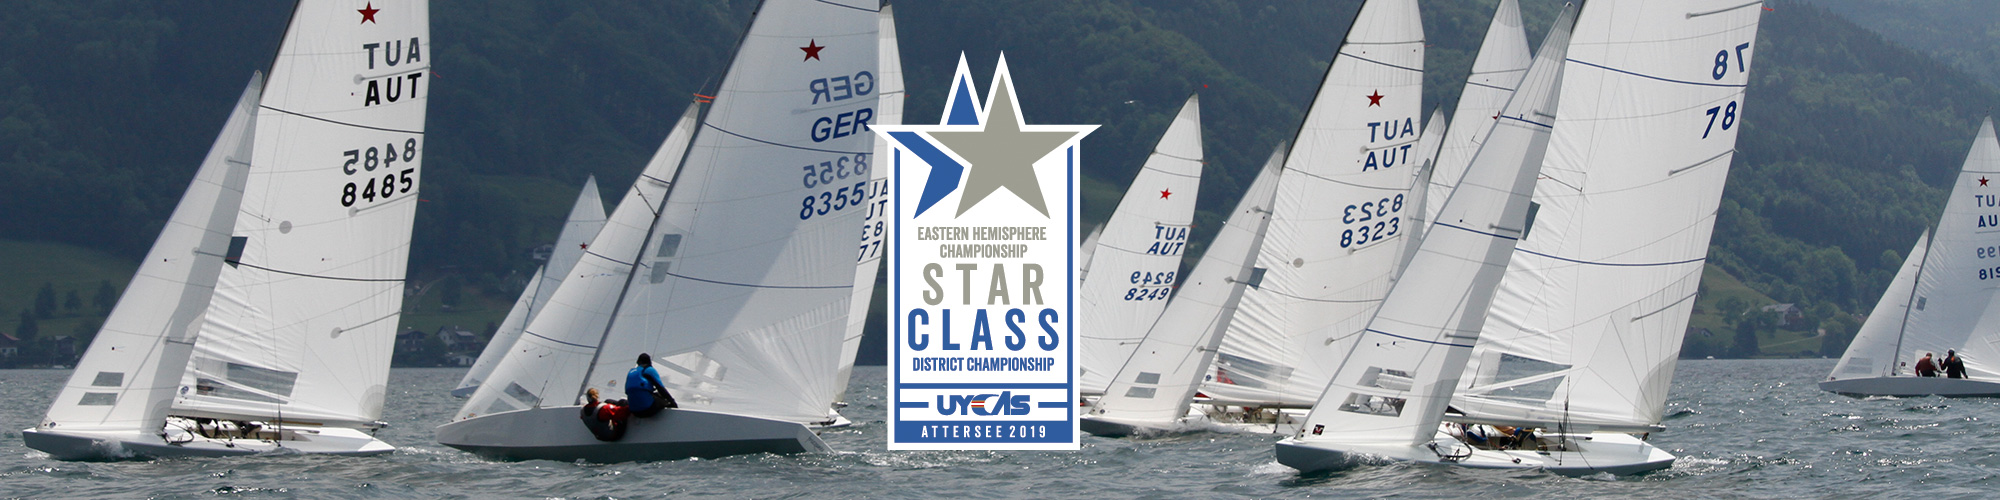  Star  Eastern Hemisphere Championship  Attersee AUT  Day 1, the Swiss